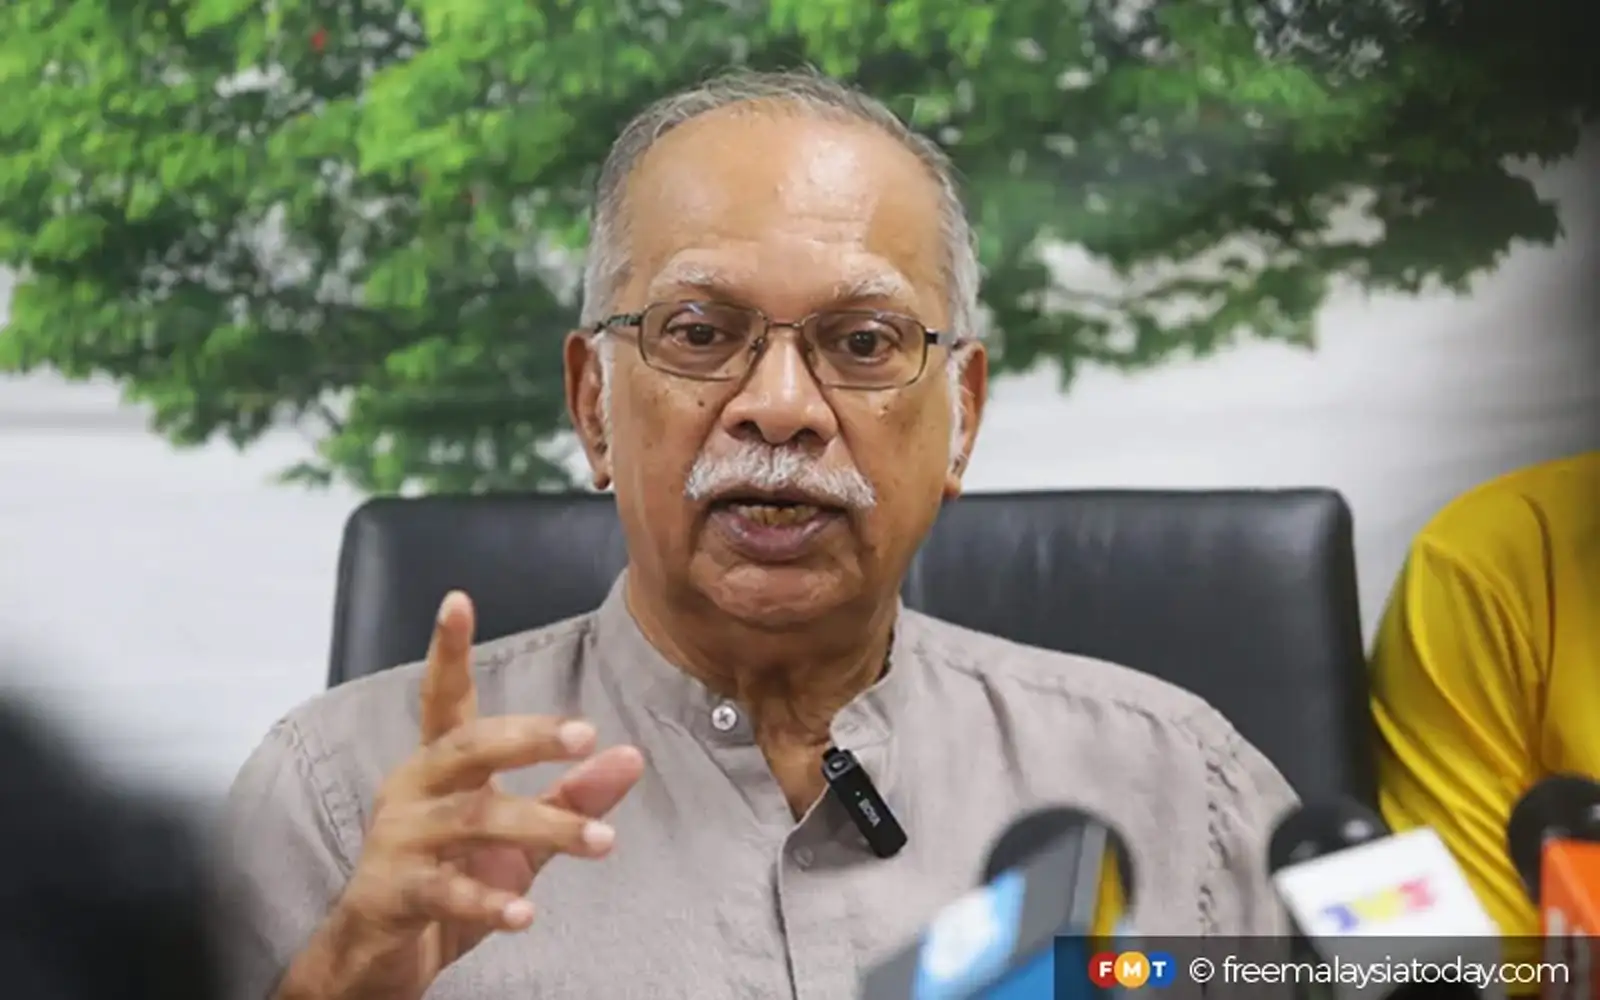 nominate indian candidate for kkb polls, ramasamy tells pn